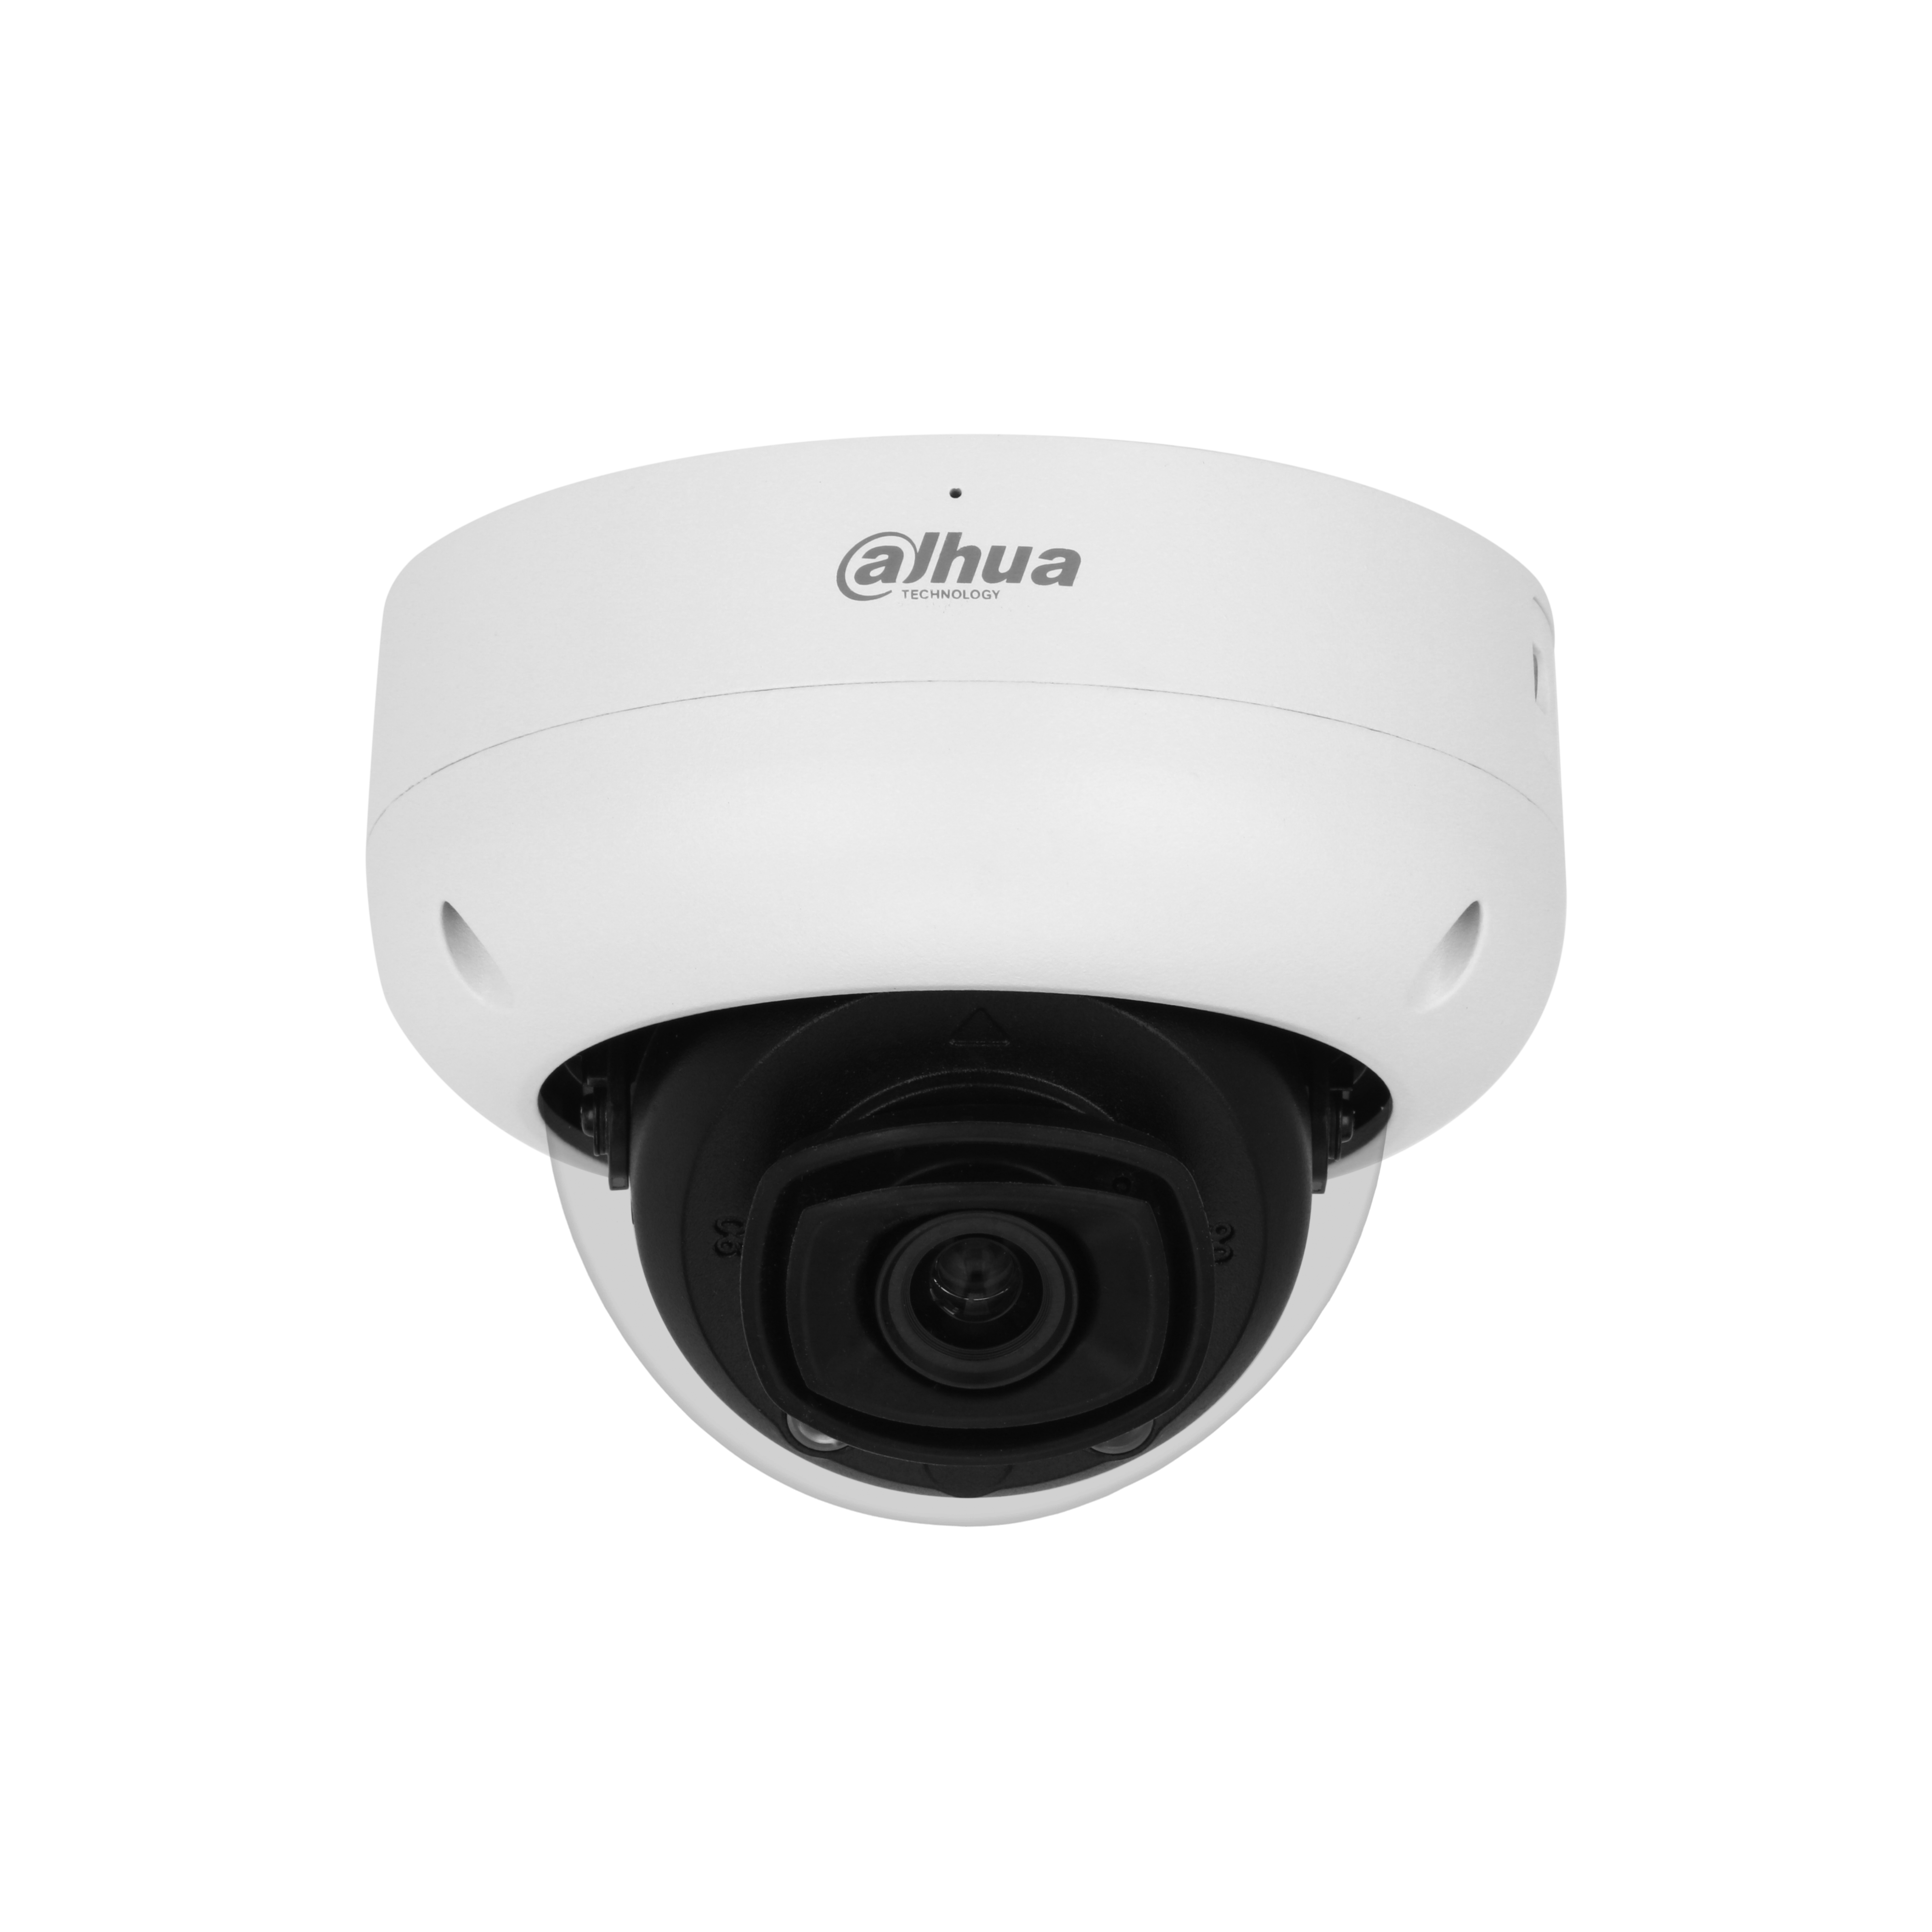 WIZMIND S SERIES IP CAMERA WHITE AI PEOPLE COUNT/ ACUPICK 5MP H.264/4+/5/5+ DOME 120 WDR METAL 2.8MM FIXED LENS DEEP LIGHT IR 50M EPOE IP67 BUILT IN MIC AUDIO IN AUDIO OUT 1 x ALARM IN 1 x ALARM OUT SUPPORT UP TO 512GB SDIK10 12VDC